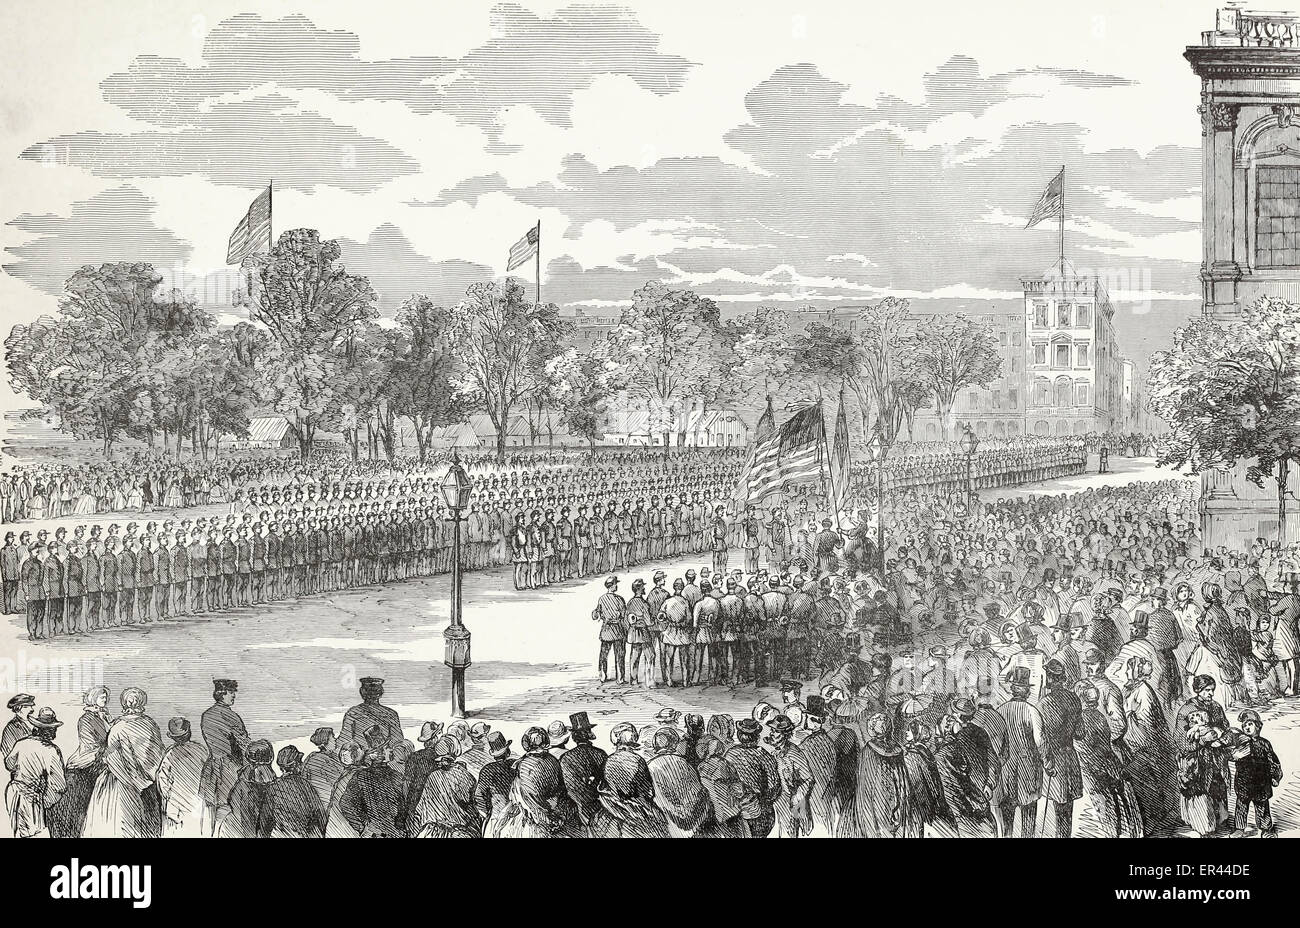 The German Regiment, Steuben Volunteers, Colonel John E Bendix commanding, receiving the American and Steuben flags in front of the City Hall, New York, May 24, 1861 USA Civil War Stock Photo